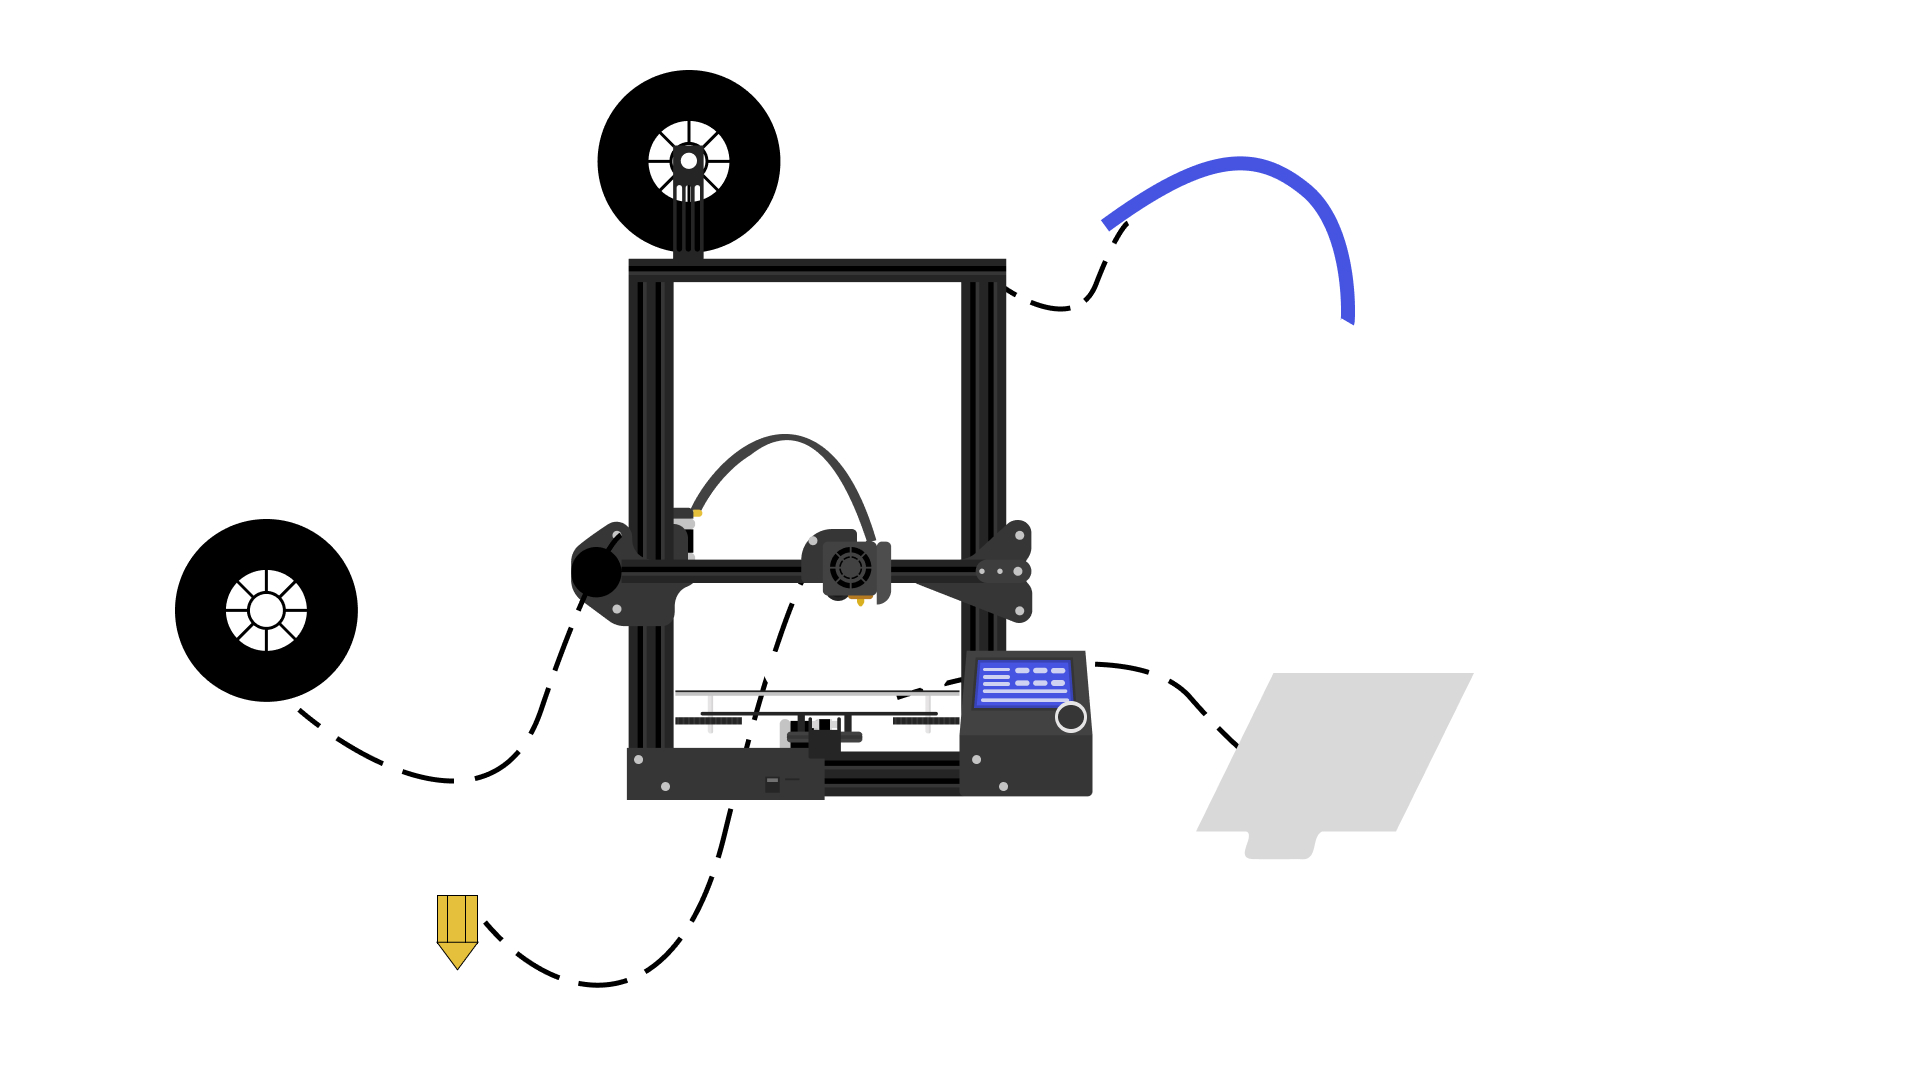 Making Your 3D Printer Pause or Wait with G-Code in Marlin - 3D